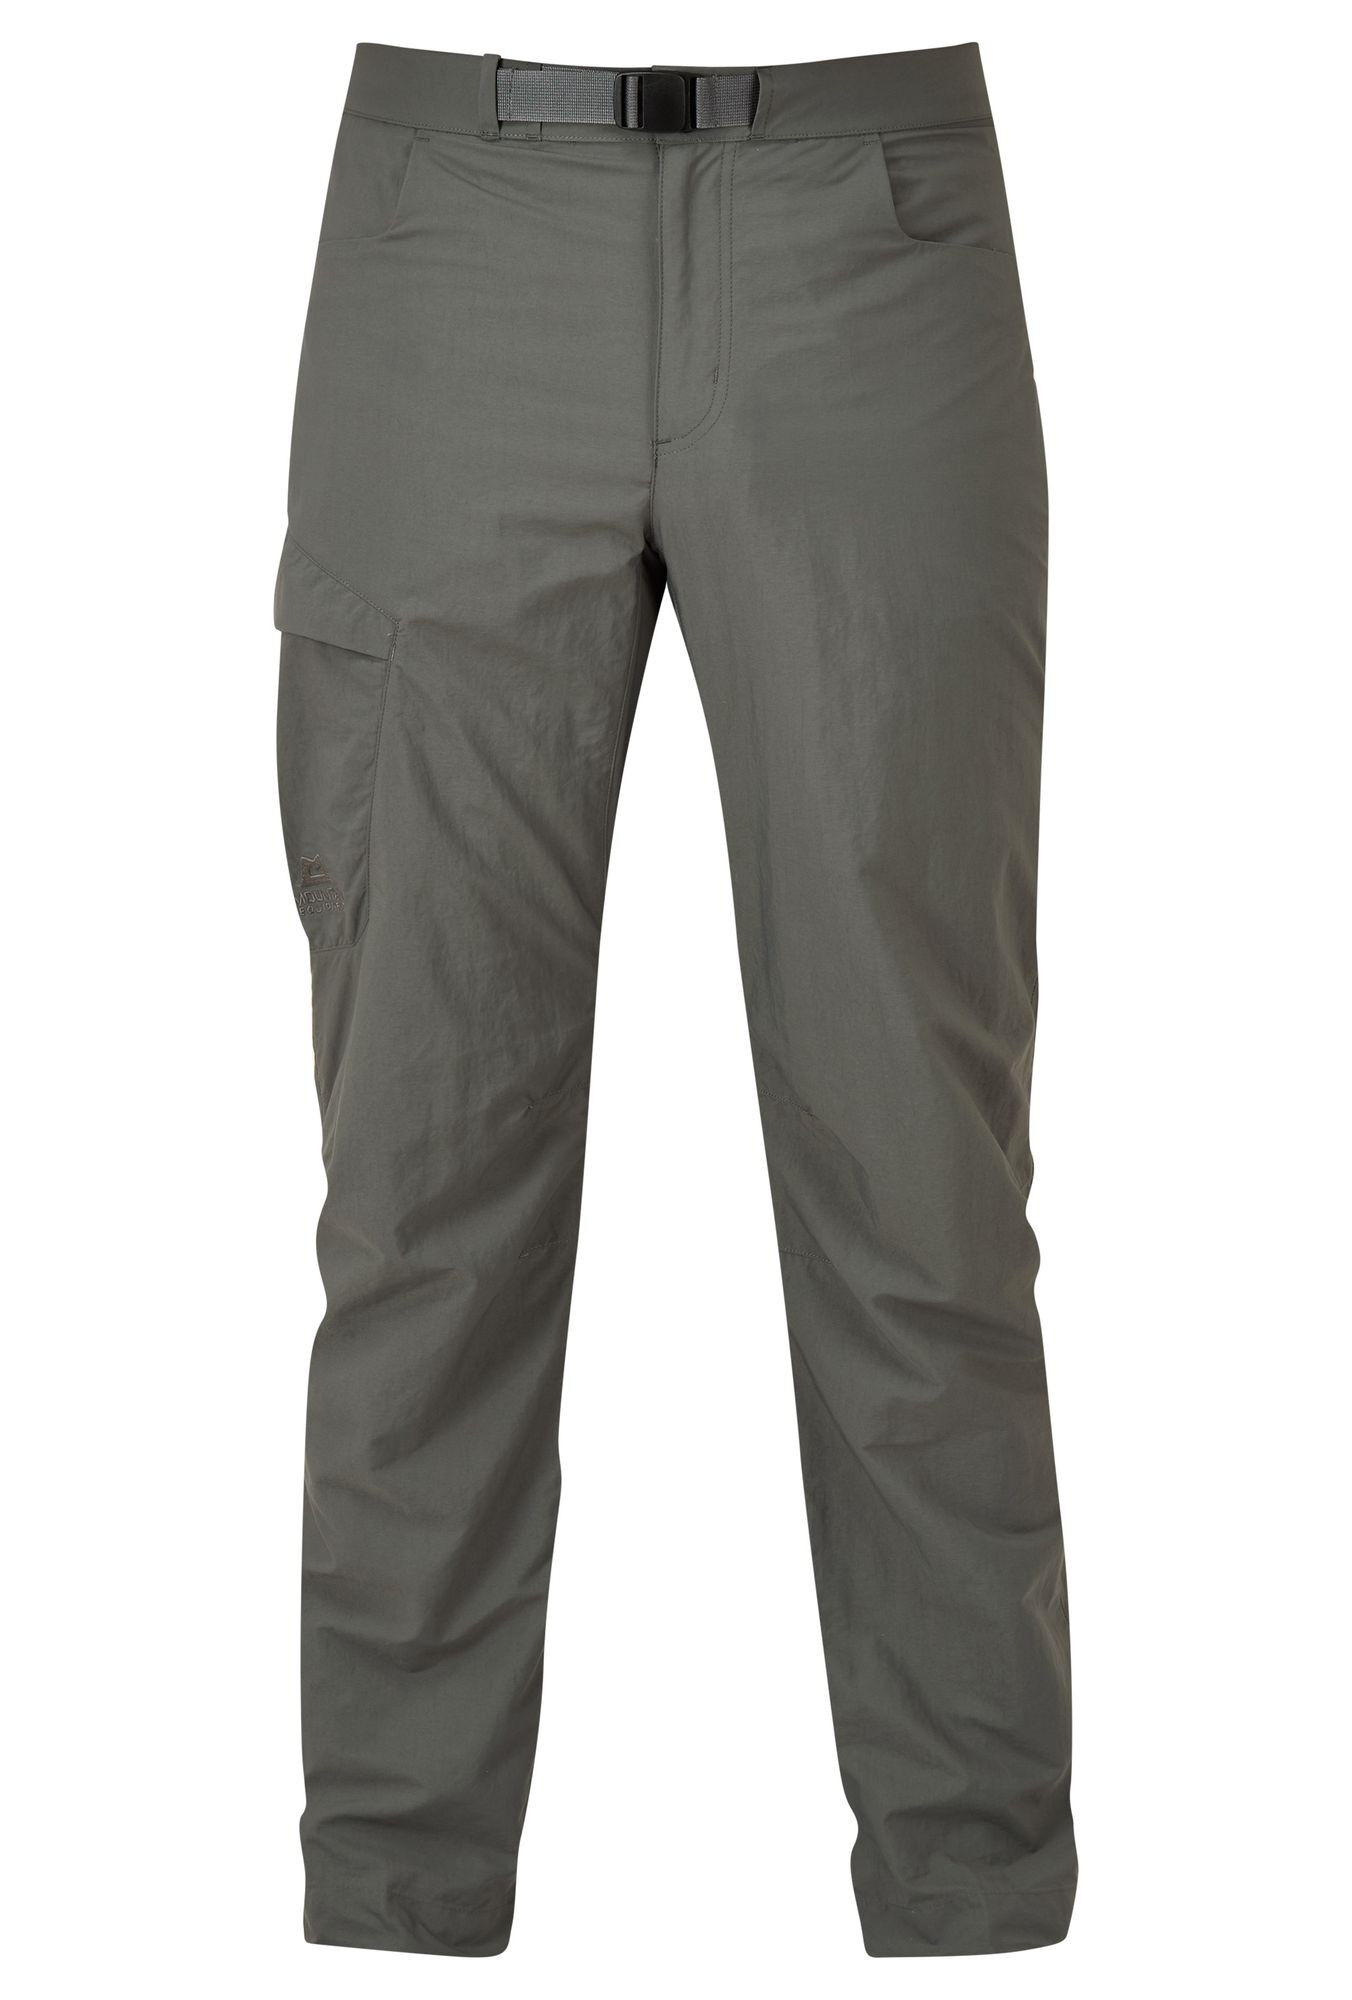 Mountain Equipment Inception Pant - Climbing trousers - Men's | Hardloop